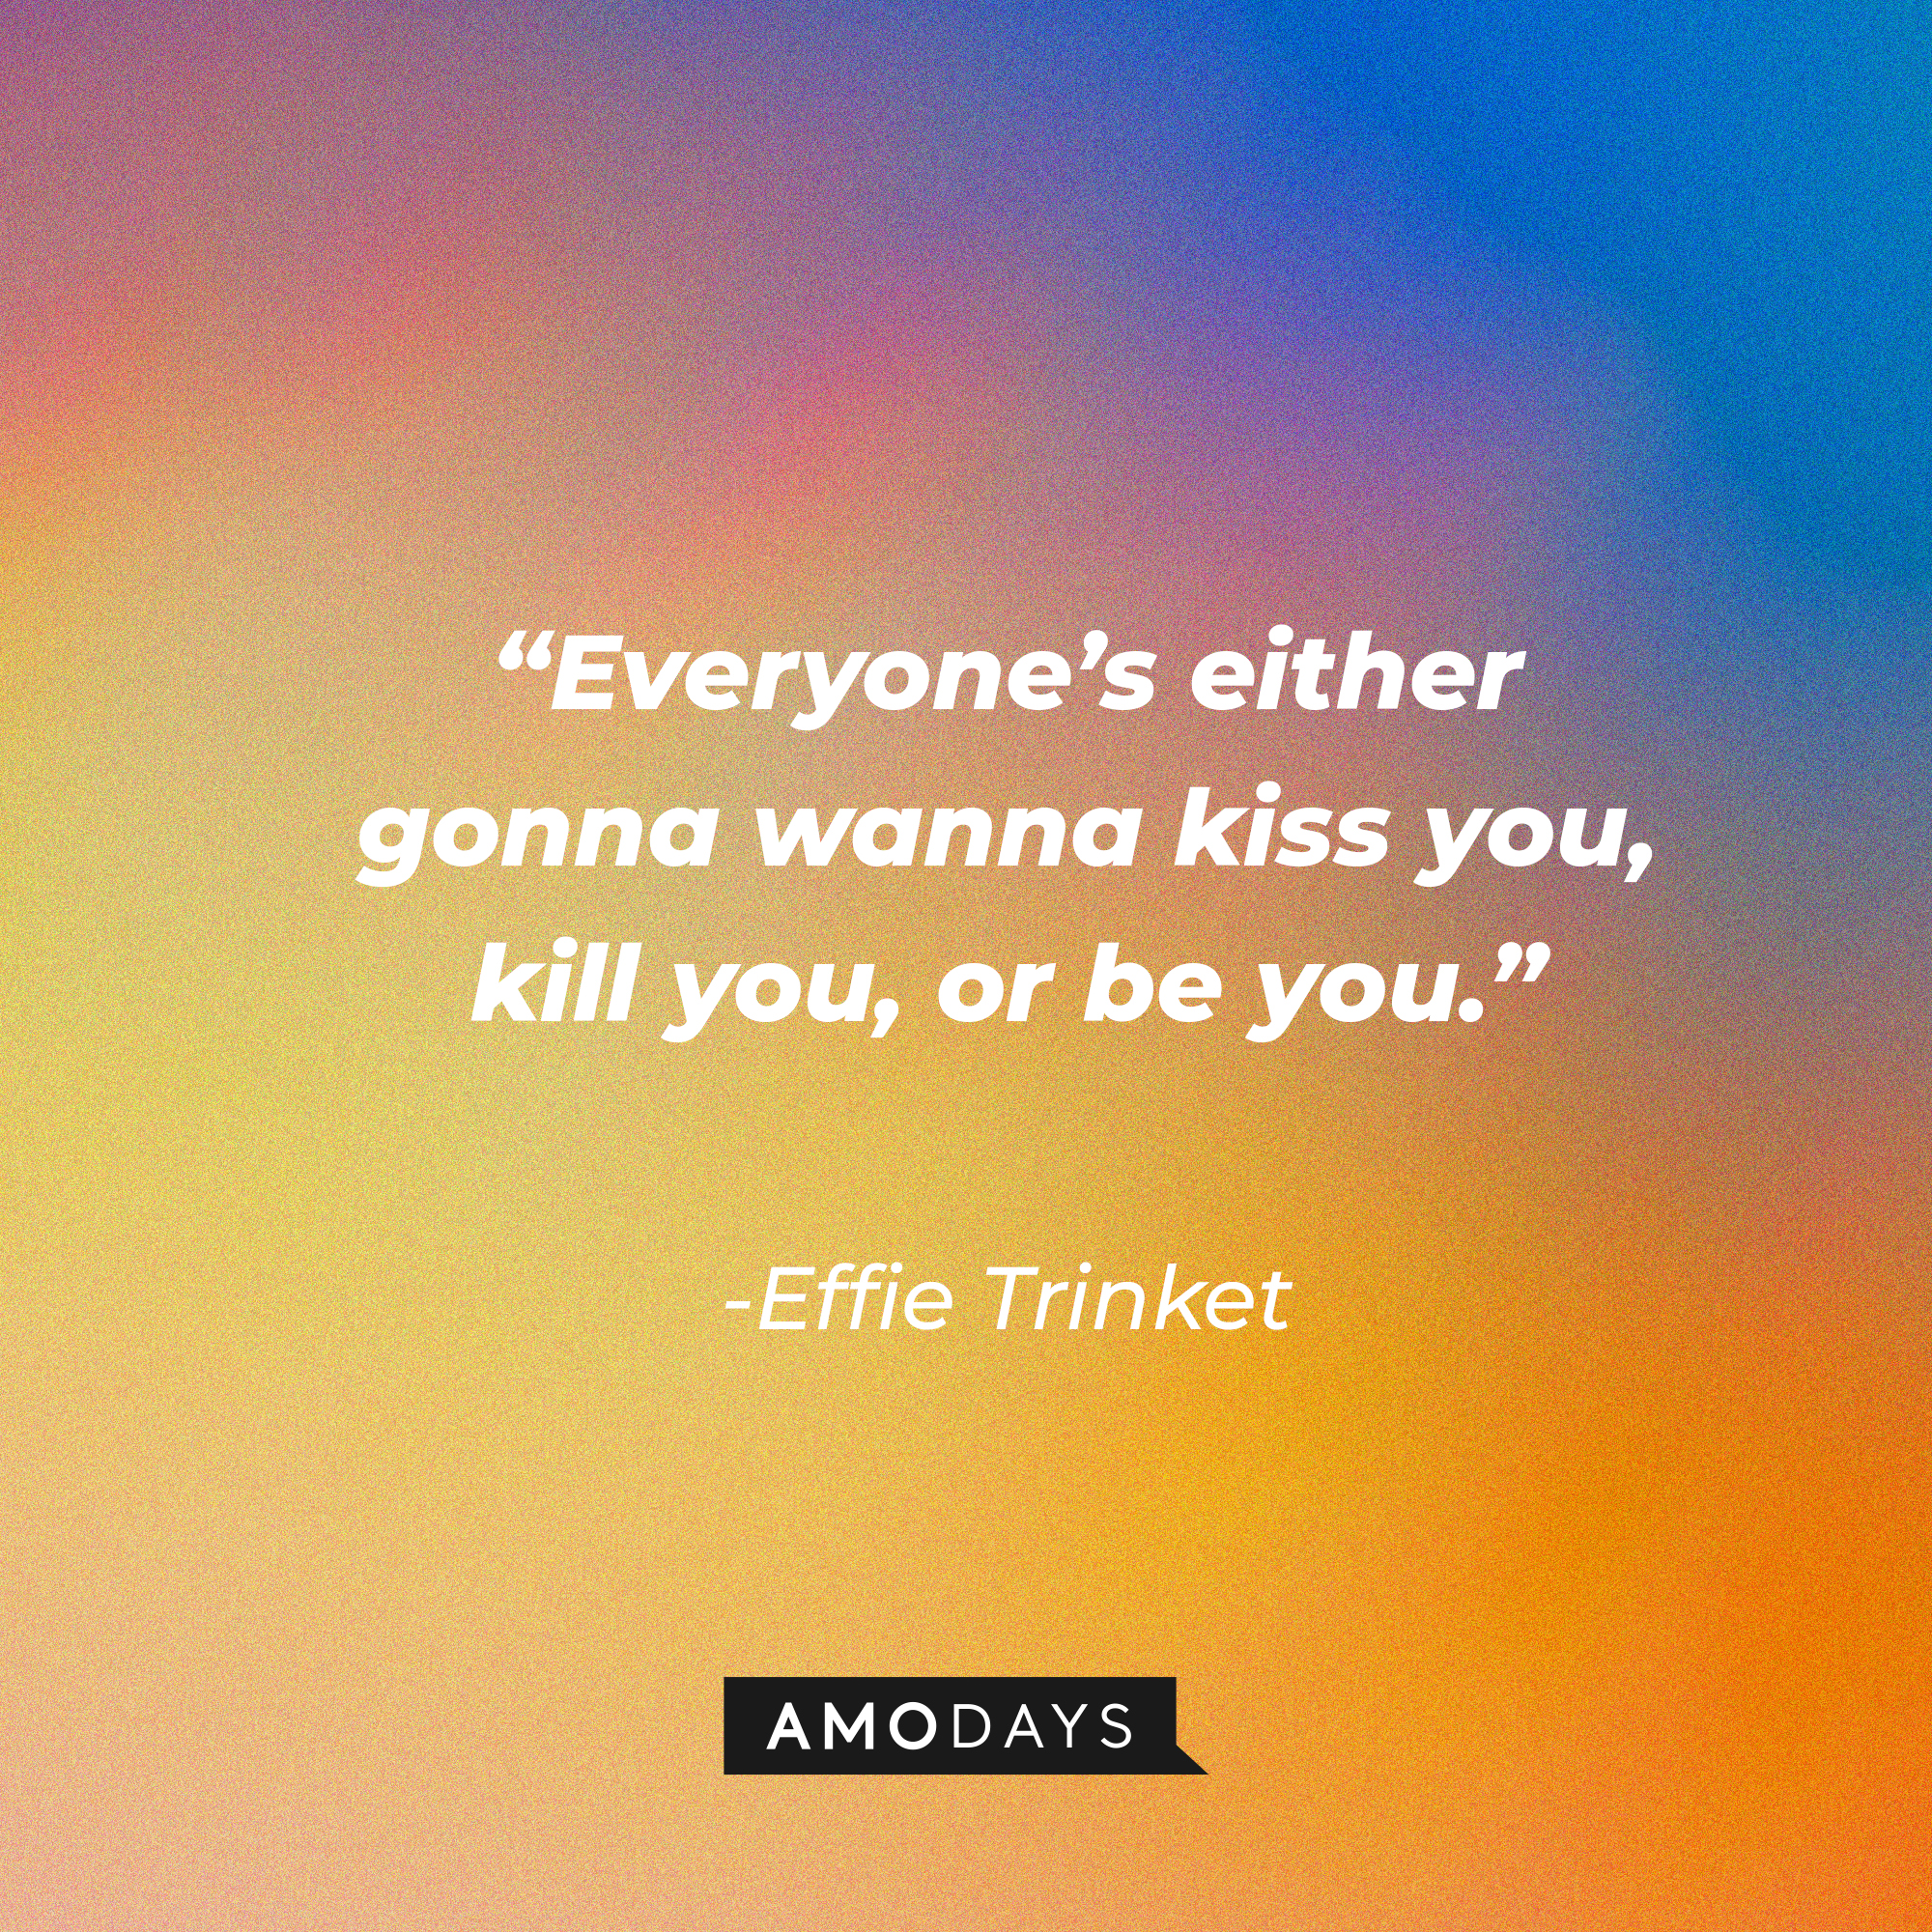 Effie Trinket's quote: “Everyone’s either gonna wanna kiss you, kill you, or be you.”  | Source: AmoDays